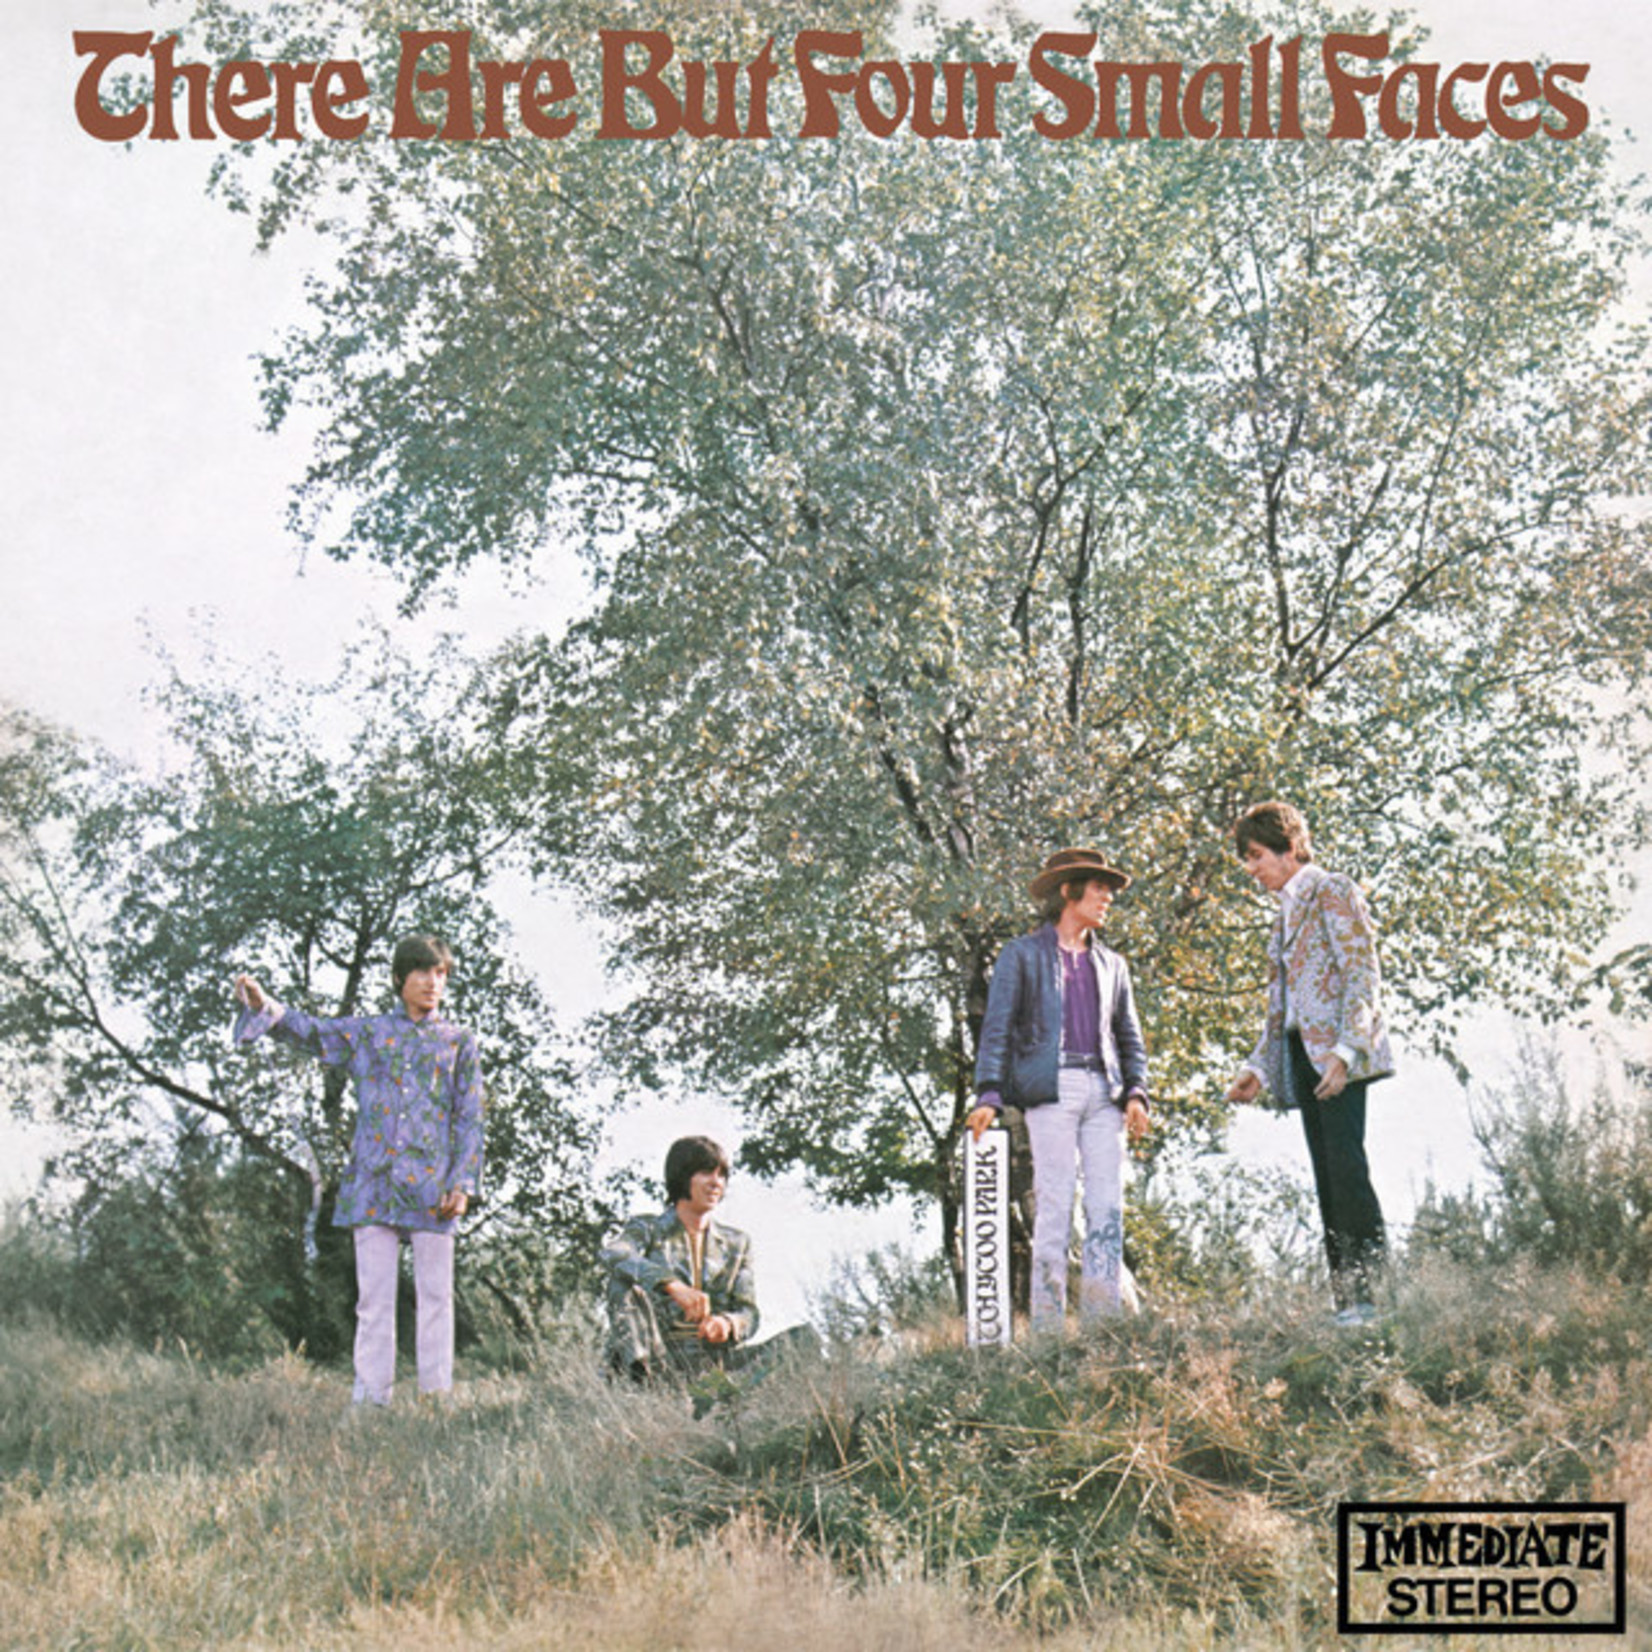 Small Faces – There Are But Four Small Faces